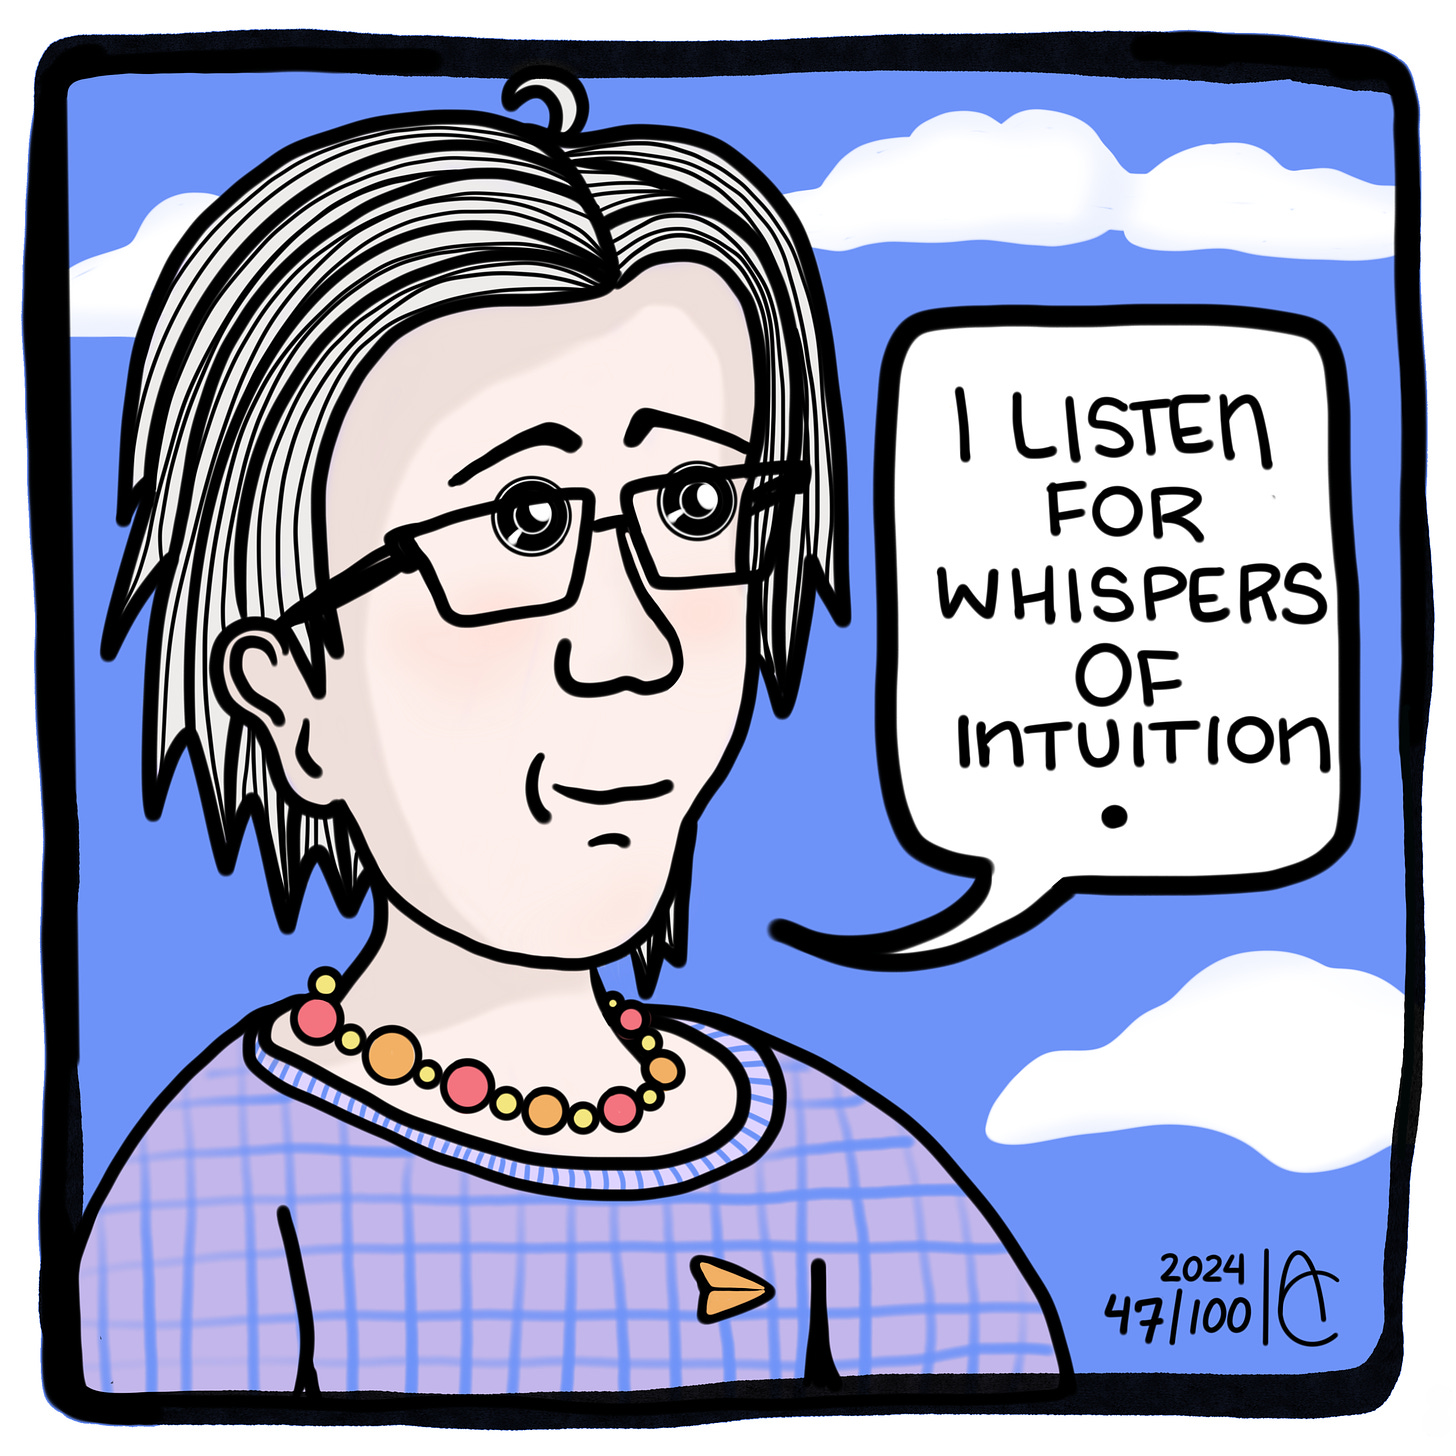 47/100:  I listen for whispers of intuition.